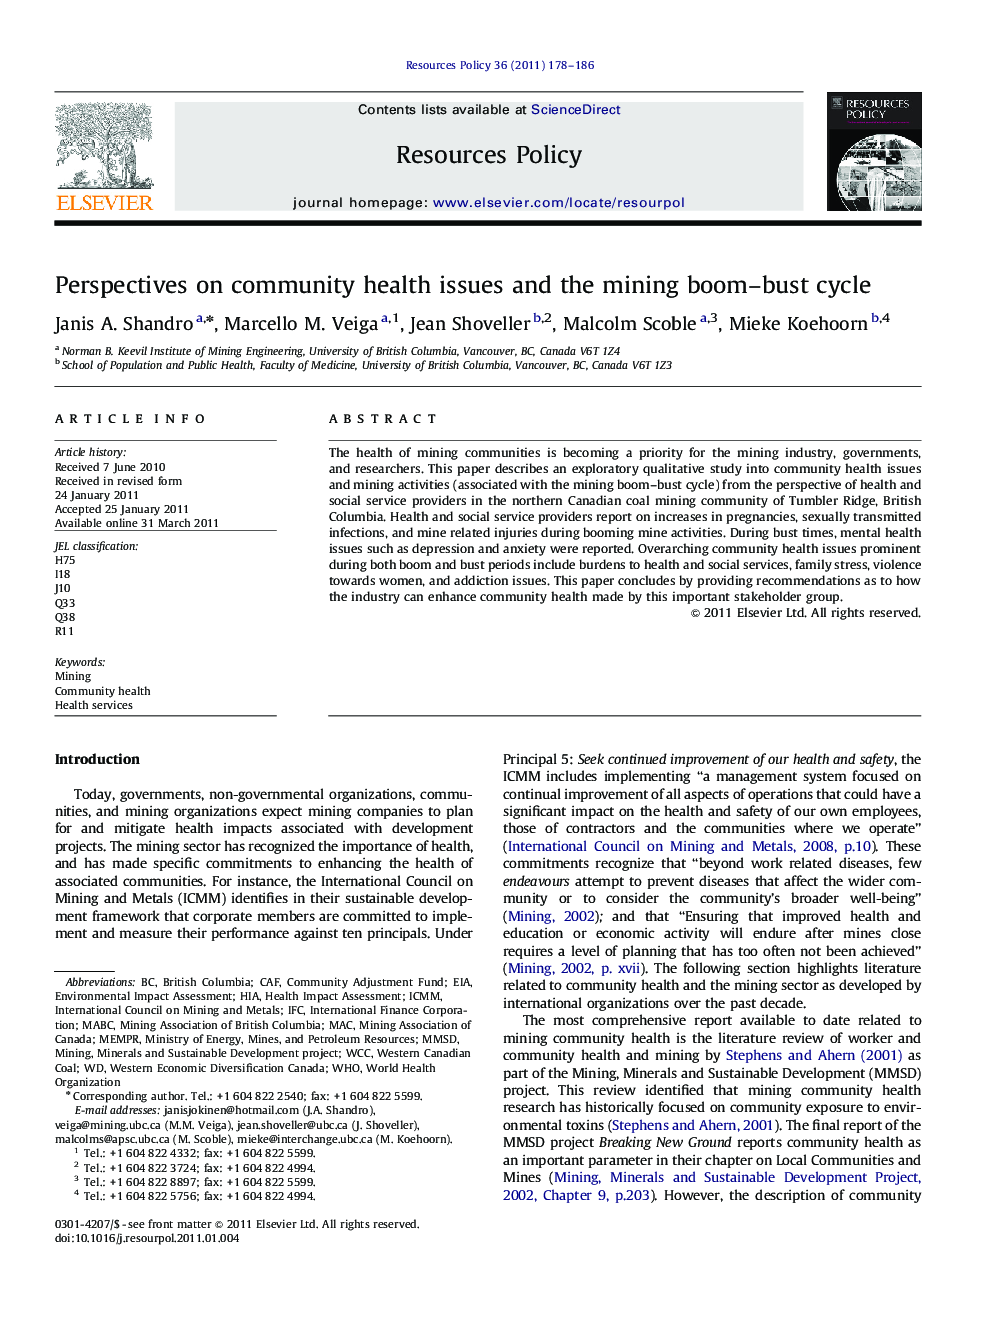 Perspectives on community health issues and the mining boom–bust cycle